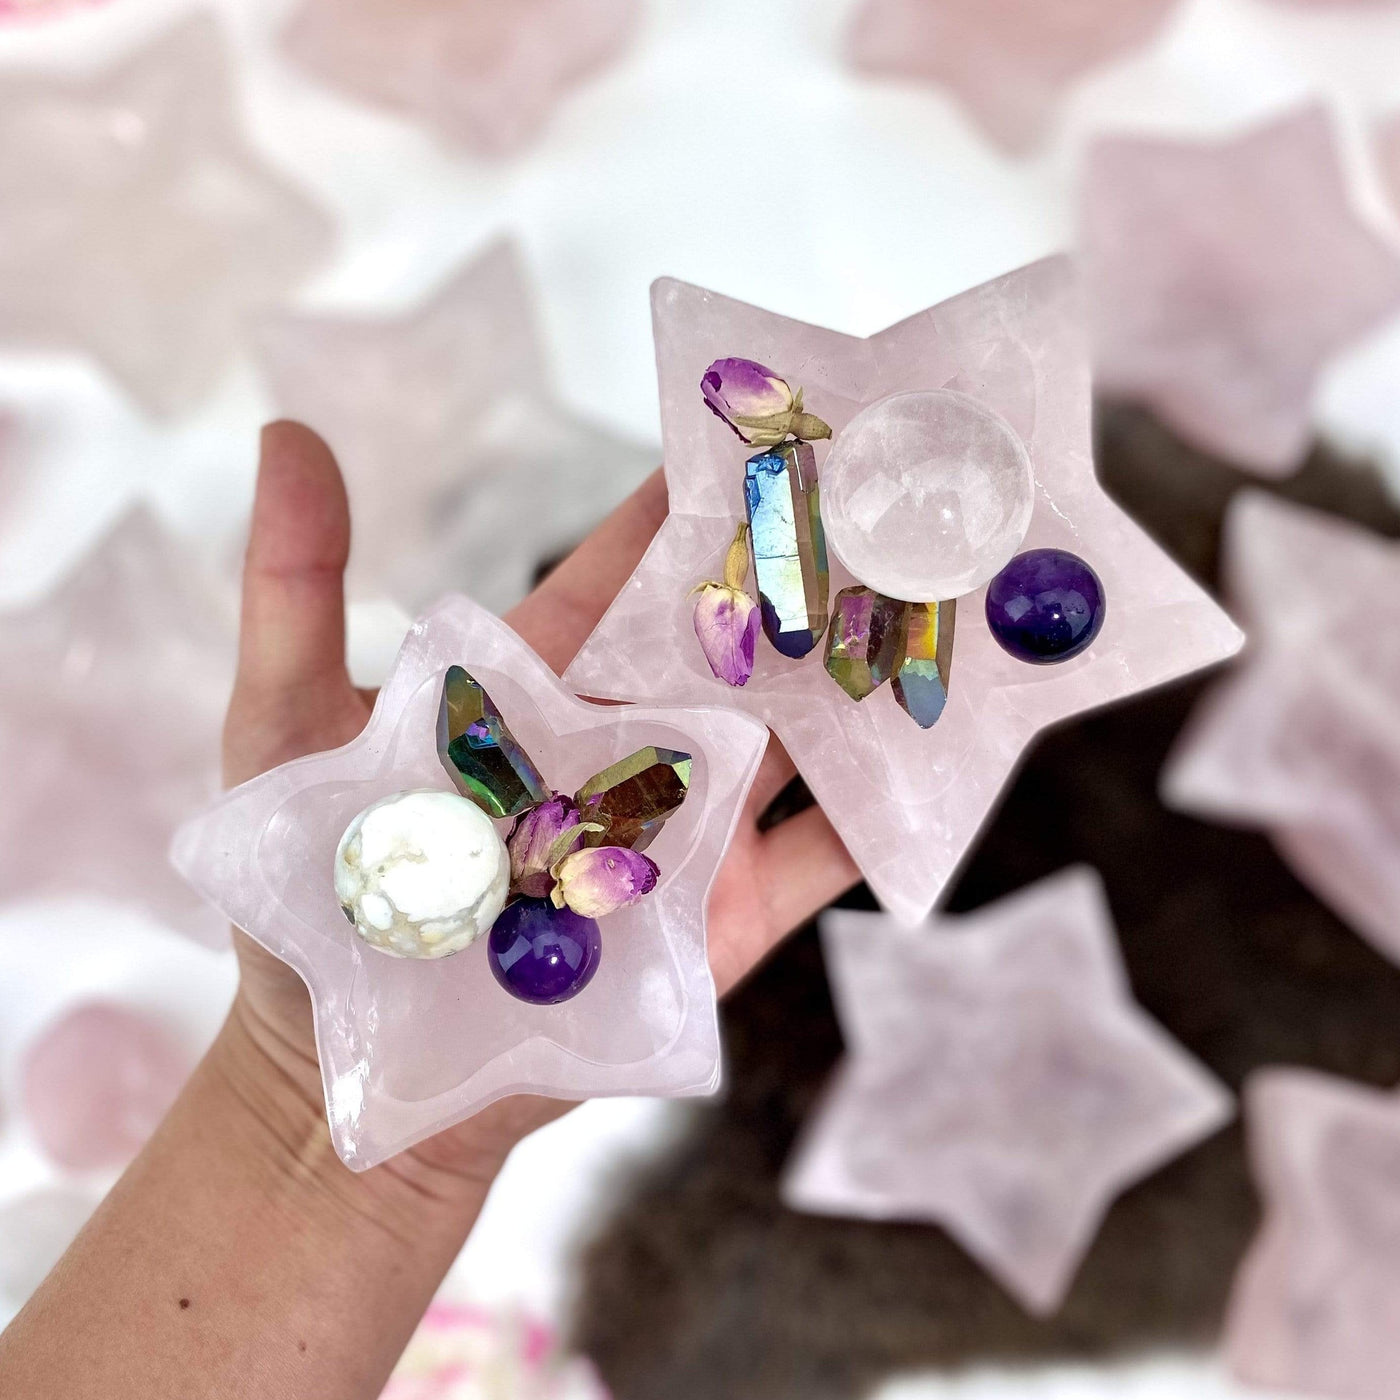 Hand holding up 2 Rose Quartz Stone Star Dishes with crystals inside with others blurred in the background